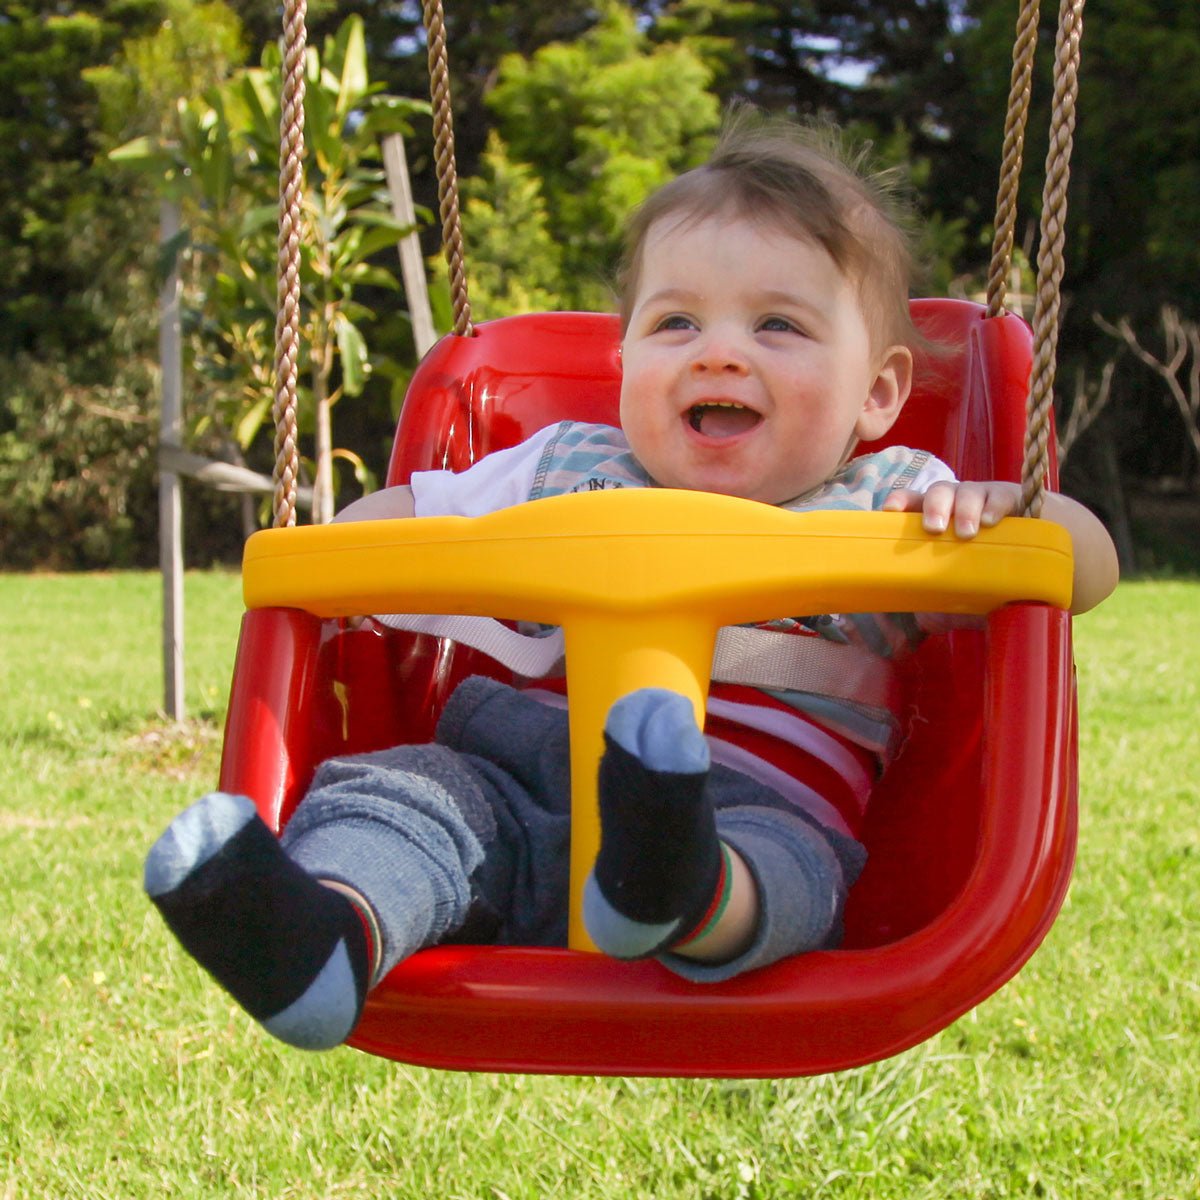 Outdoor Fun for Toddlers with Lifespan Kids Swing Seat